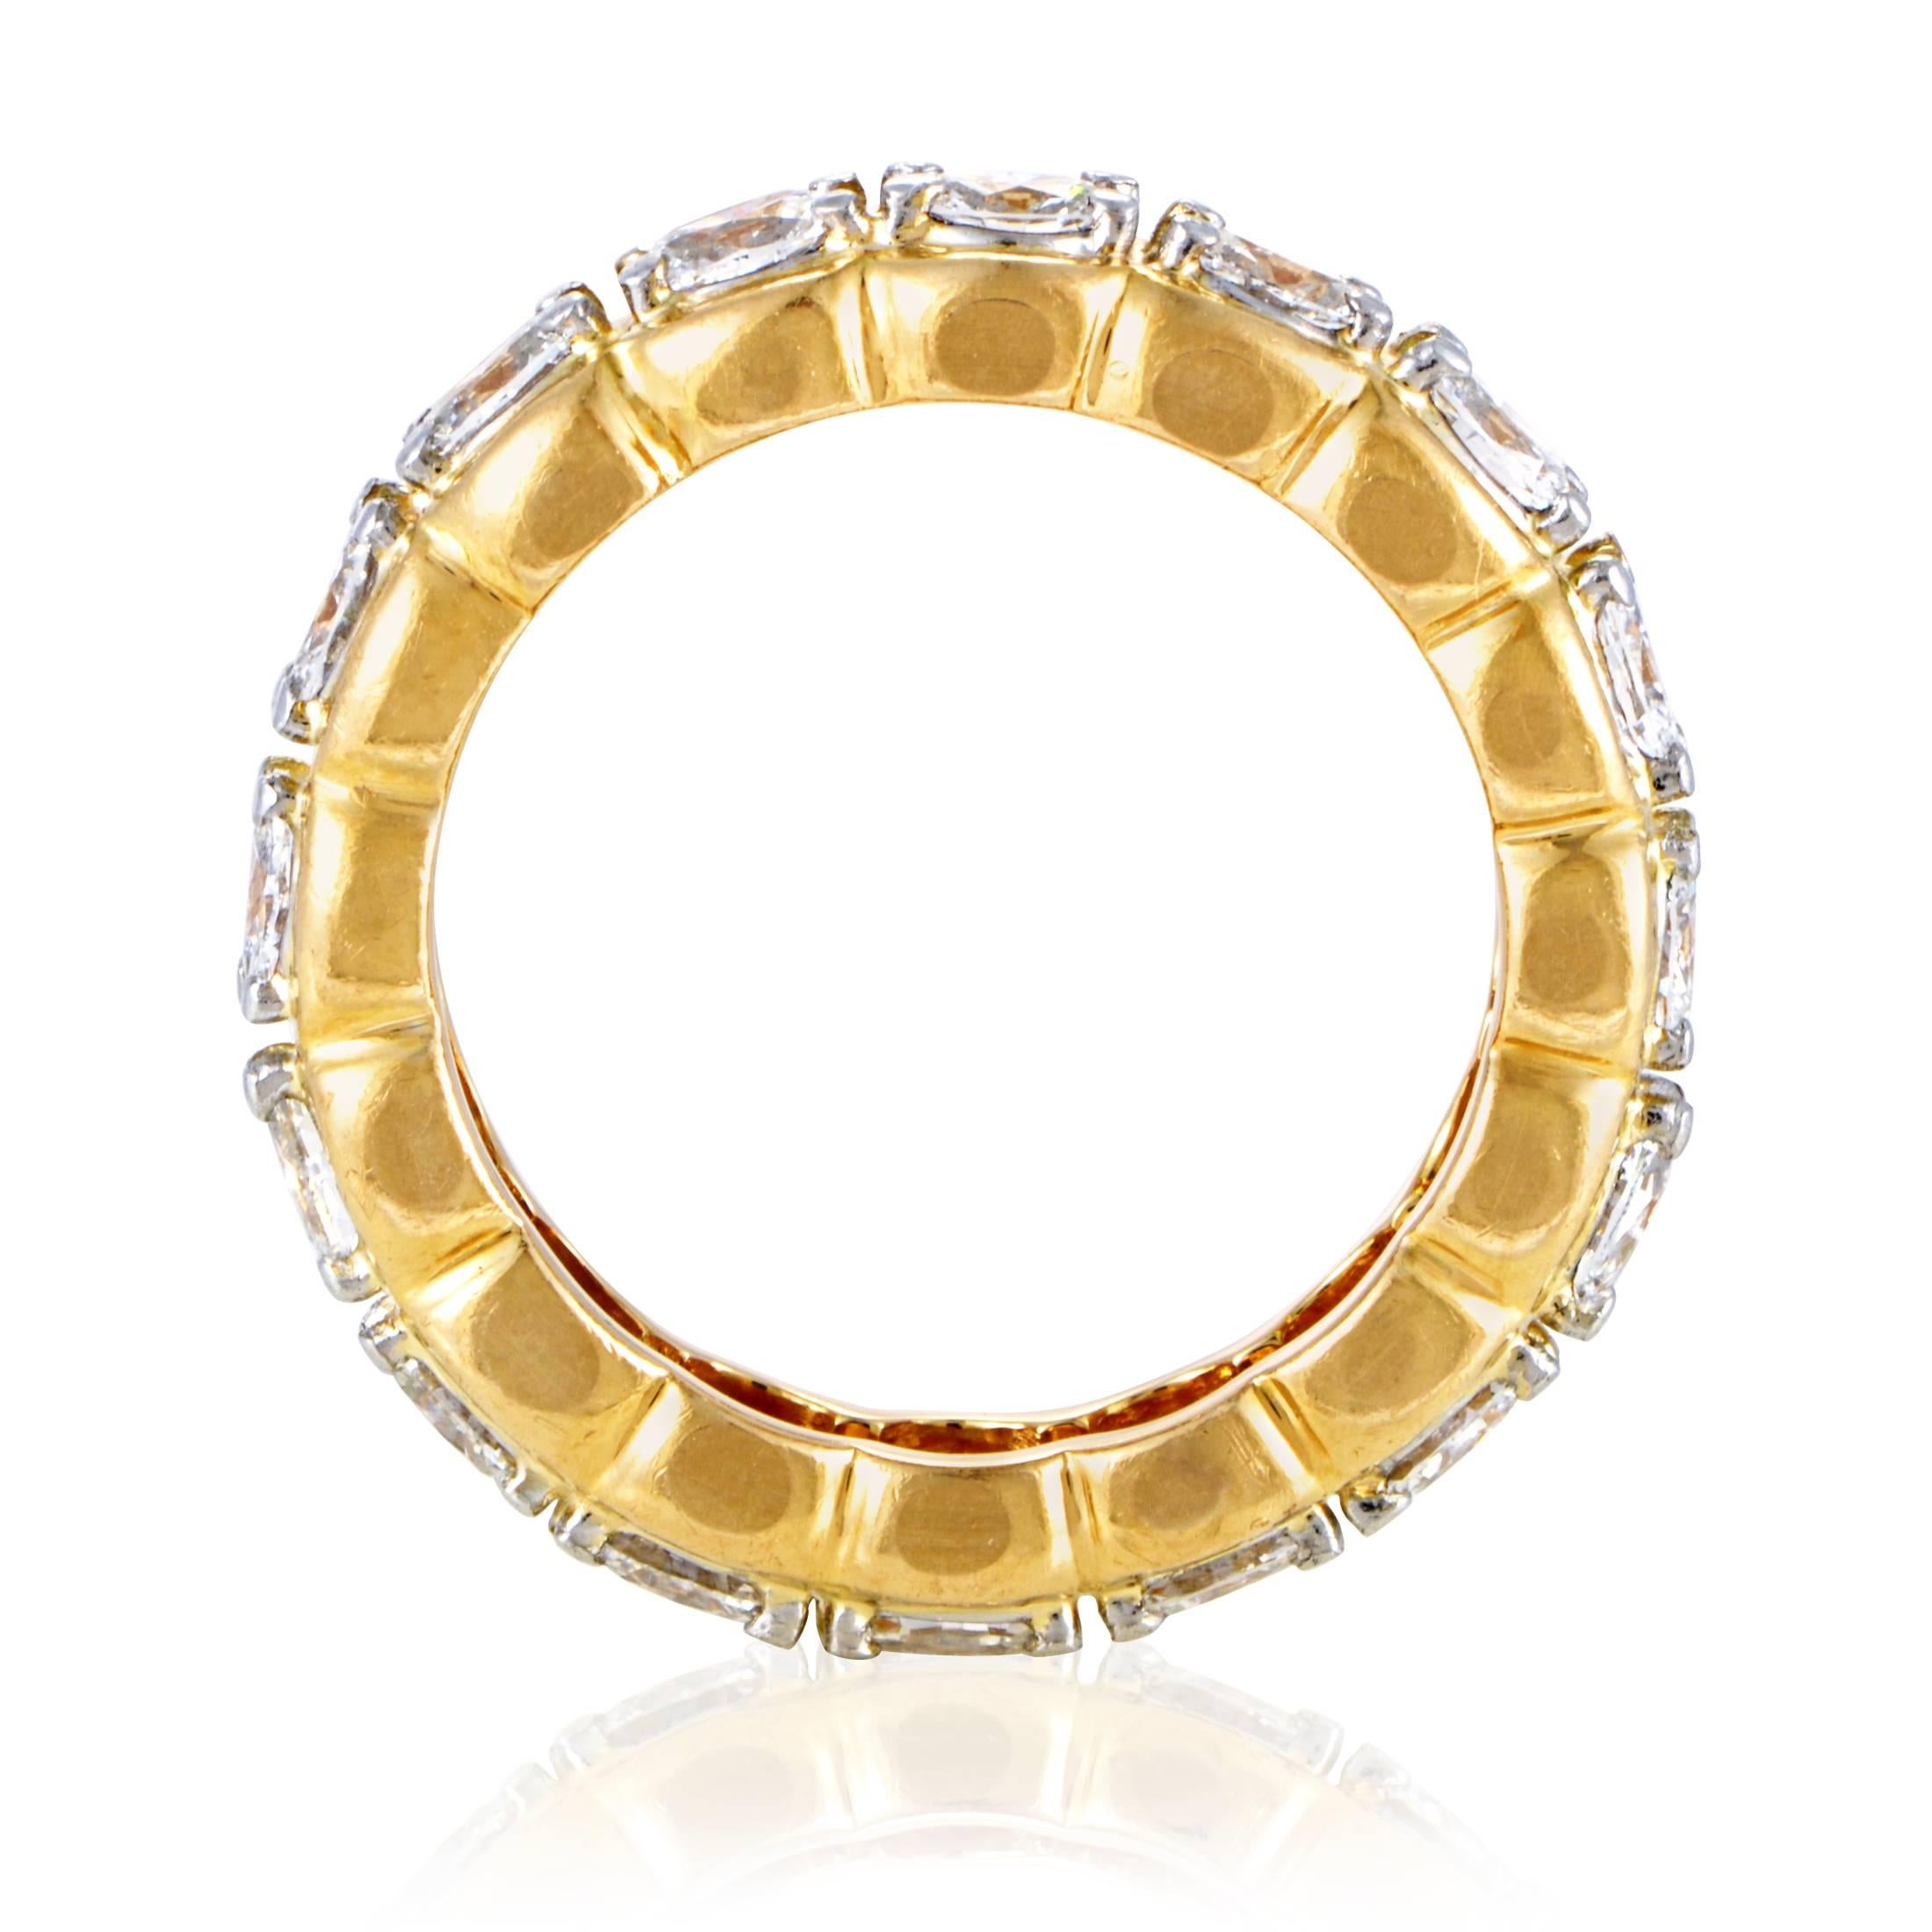 This dazzling eternity band from Oscar Heyman is the perfect piece of bridal jewelry. The ring is made of 18K yellow gold and is set with 3.50ct of diamonds.
Ring Size: 8.0 (56 1/2)
Band Thickness: 5 mm